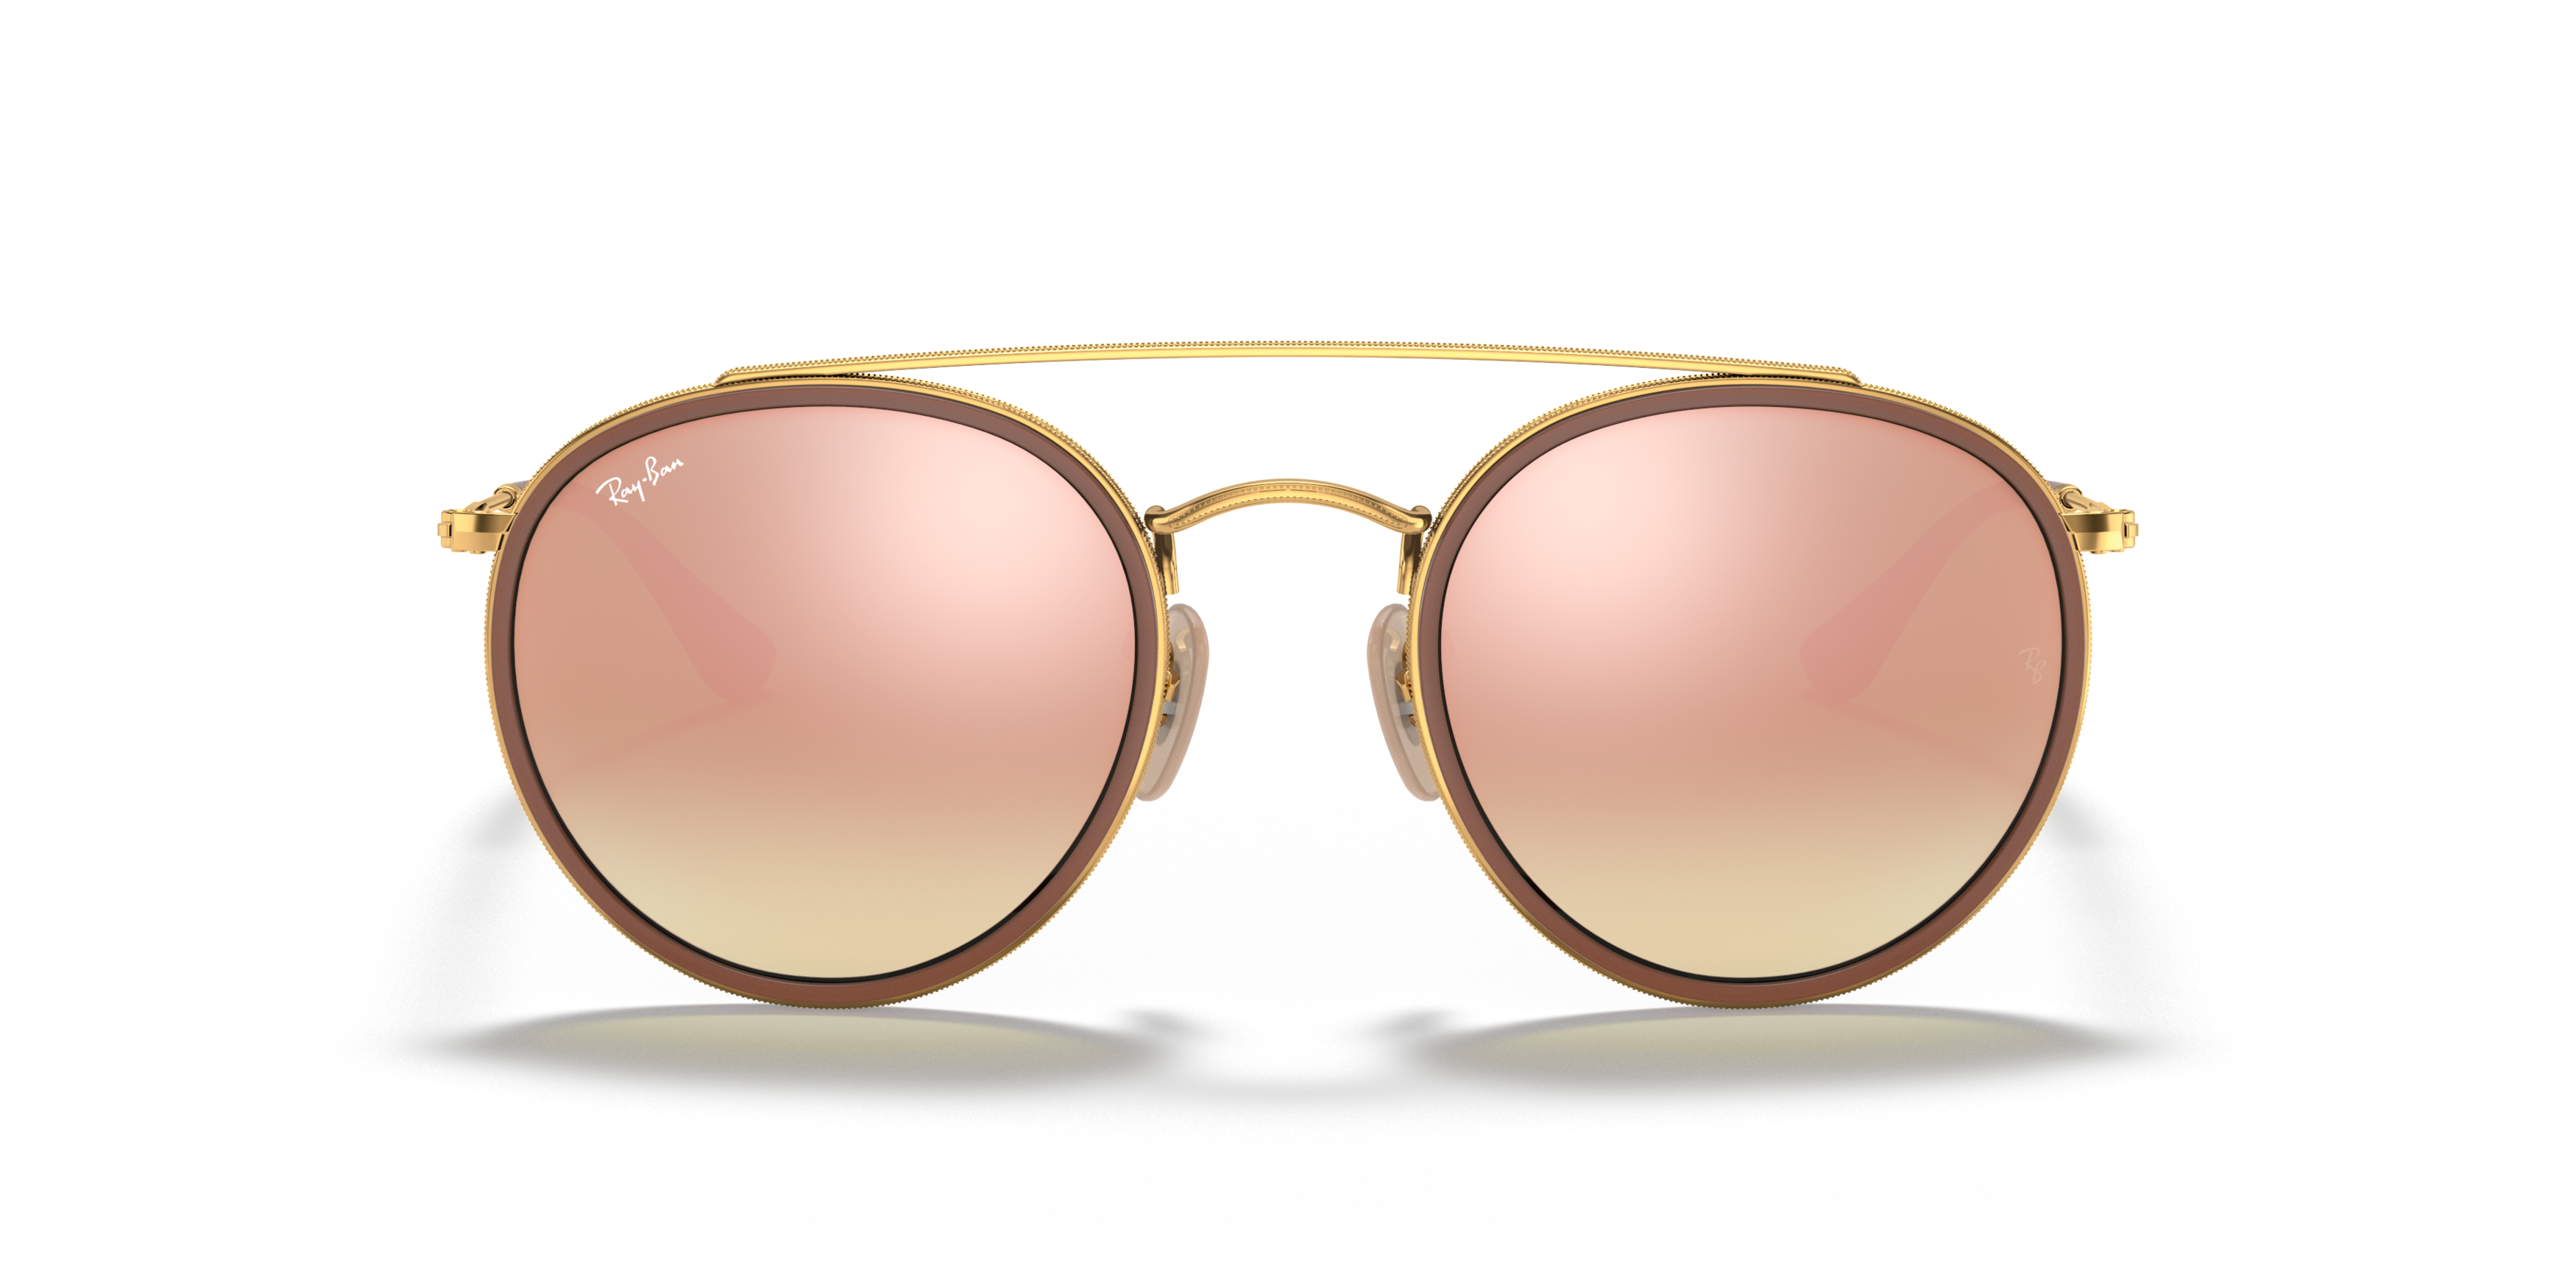 [products.image.front] Ray-Ban Round Double Bridge RB3647N 001/7O